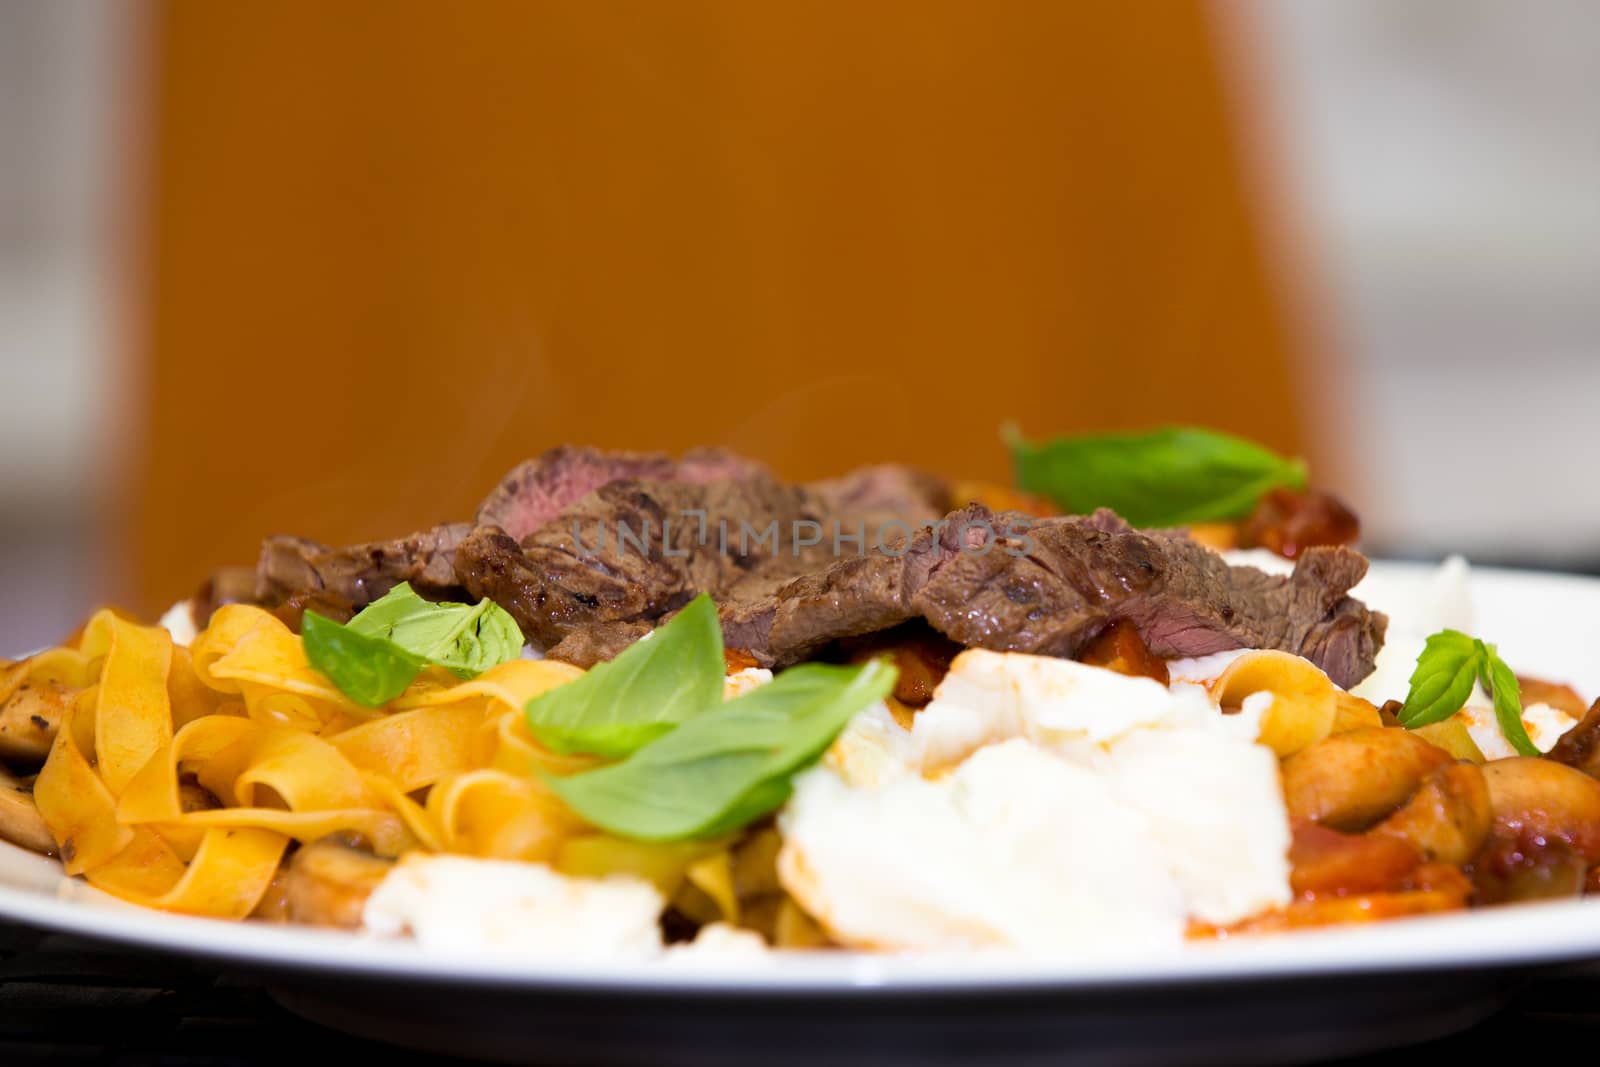 Serving of grilled beef steak and Italian pasta garnished with fresh basil leaves, low angle view